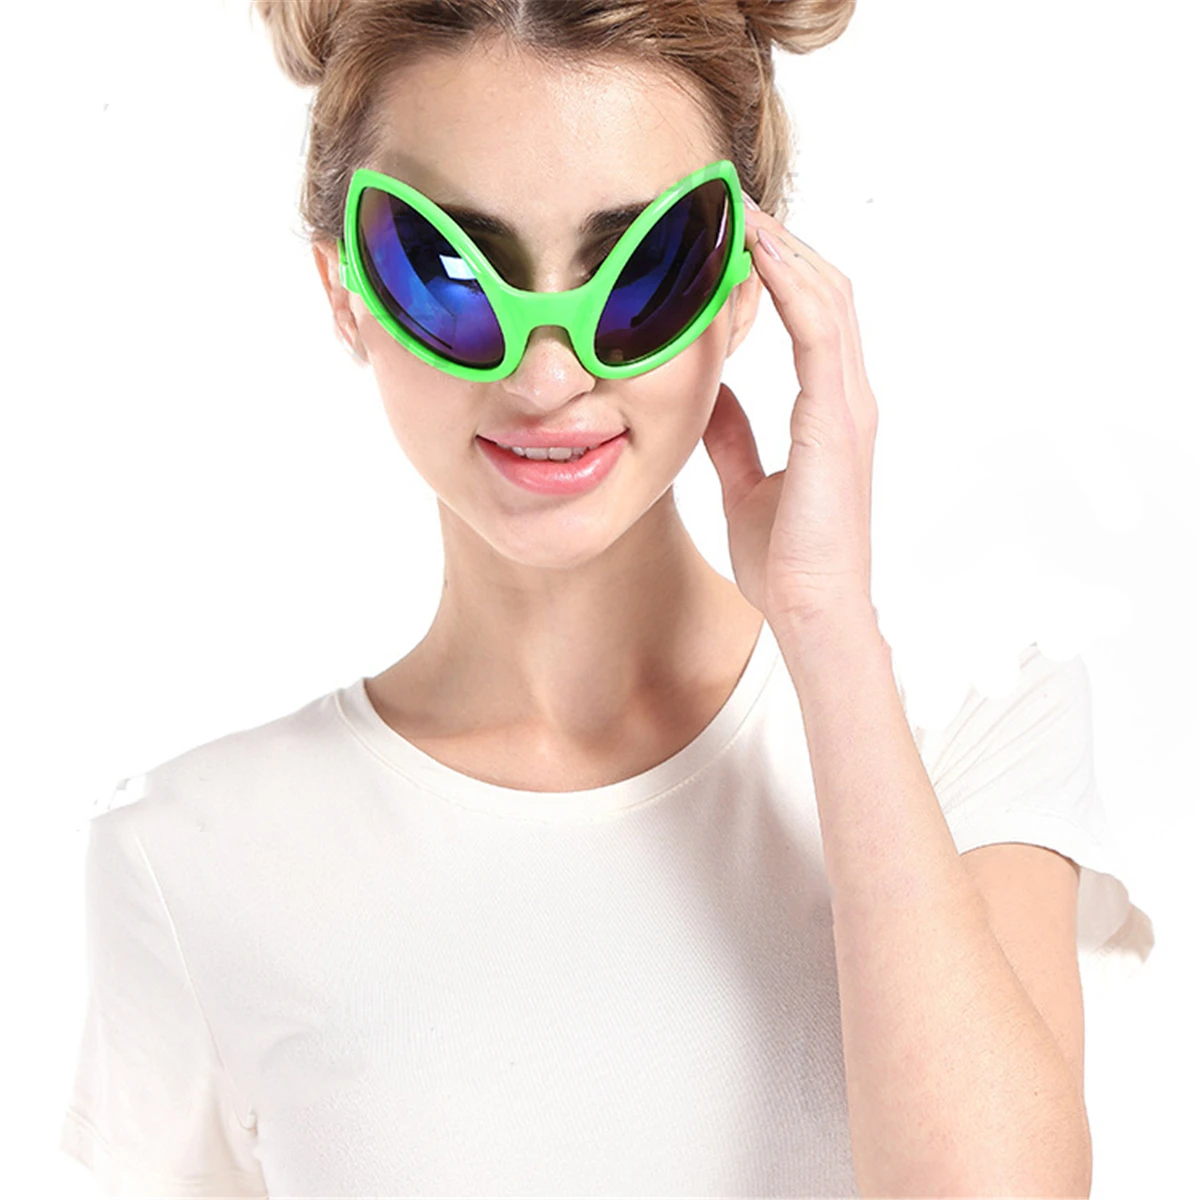 Funny Alien Costume Mask Novelty Beach Sunglasses Halloween Party Favors Photo Props Supplies Kids Adult Toy